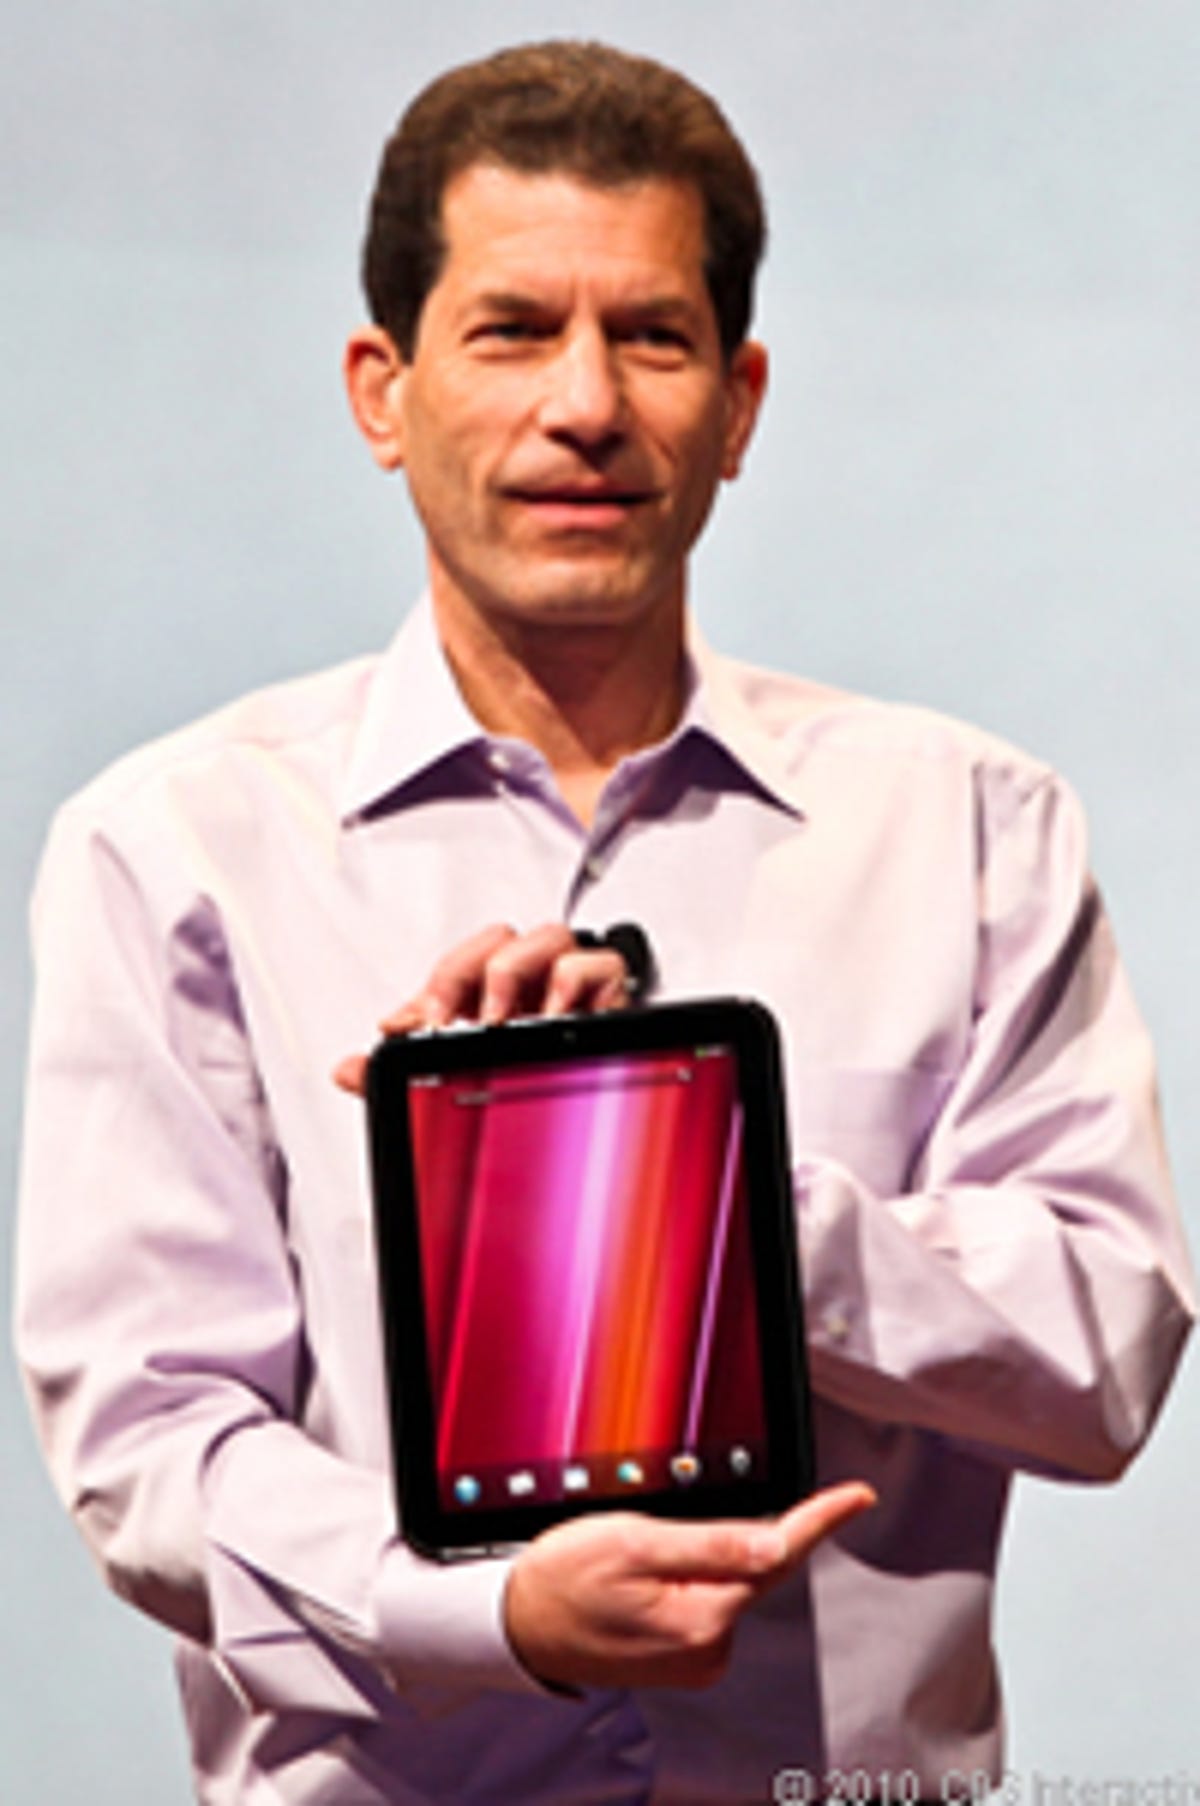 HP's Jon Rubinstein and the TouchPad tablet.